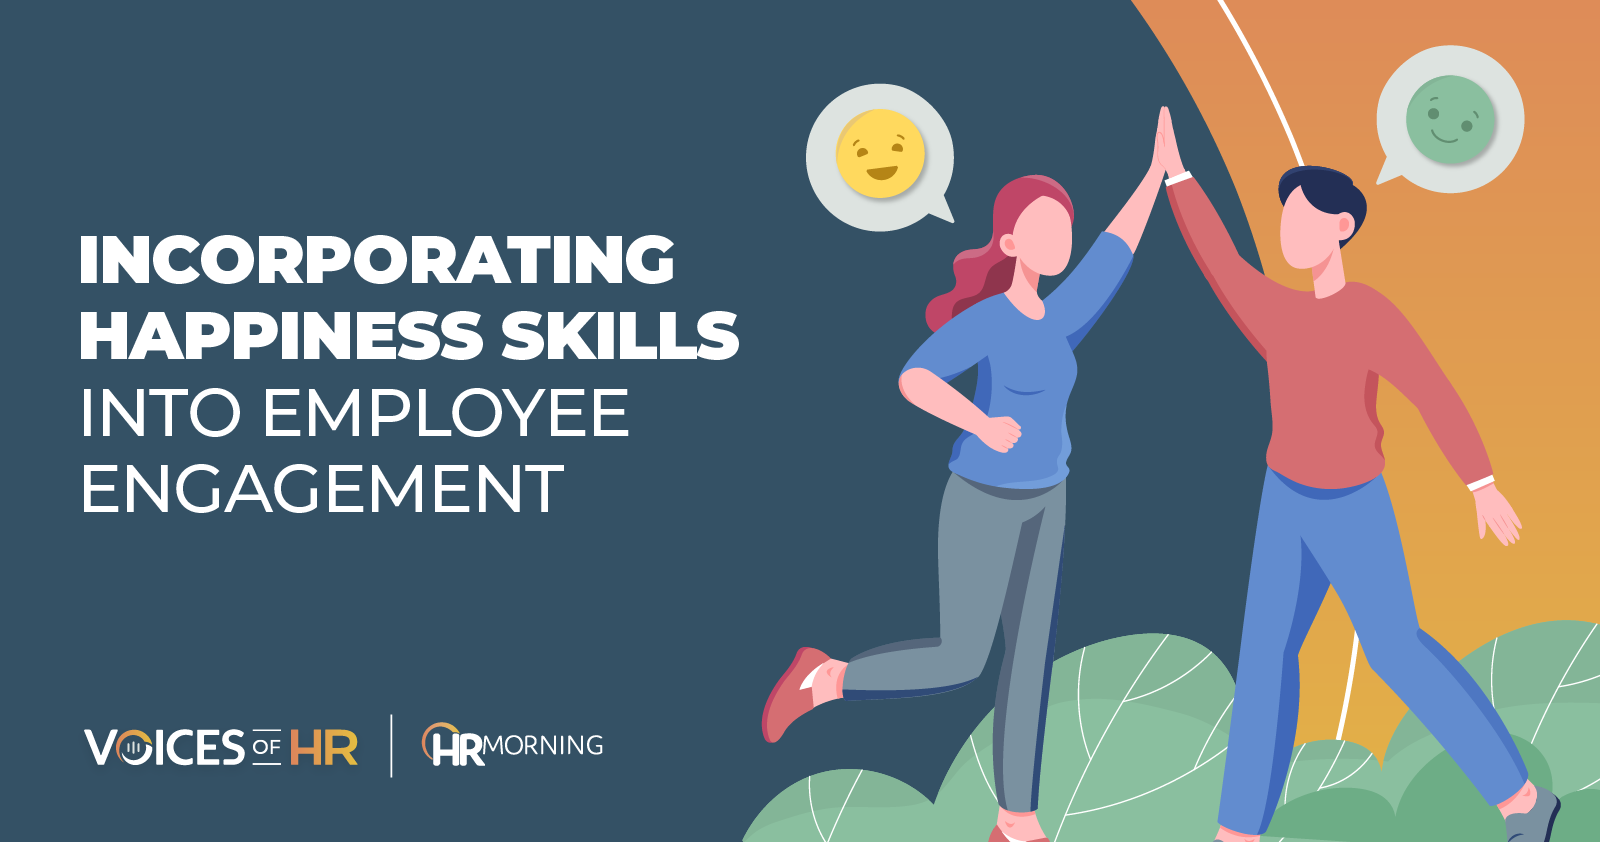 Can HR do anything about employee happiness? Expert says 'yes' & shares steps to take